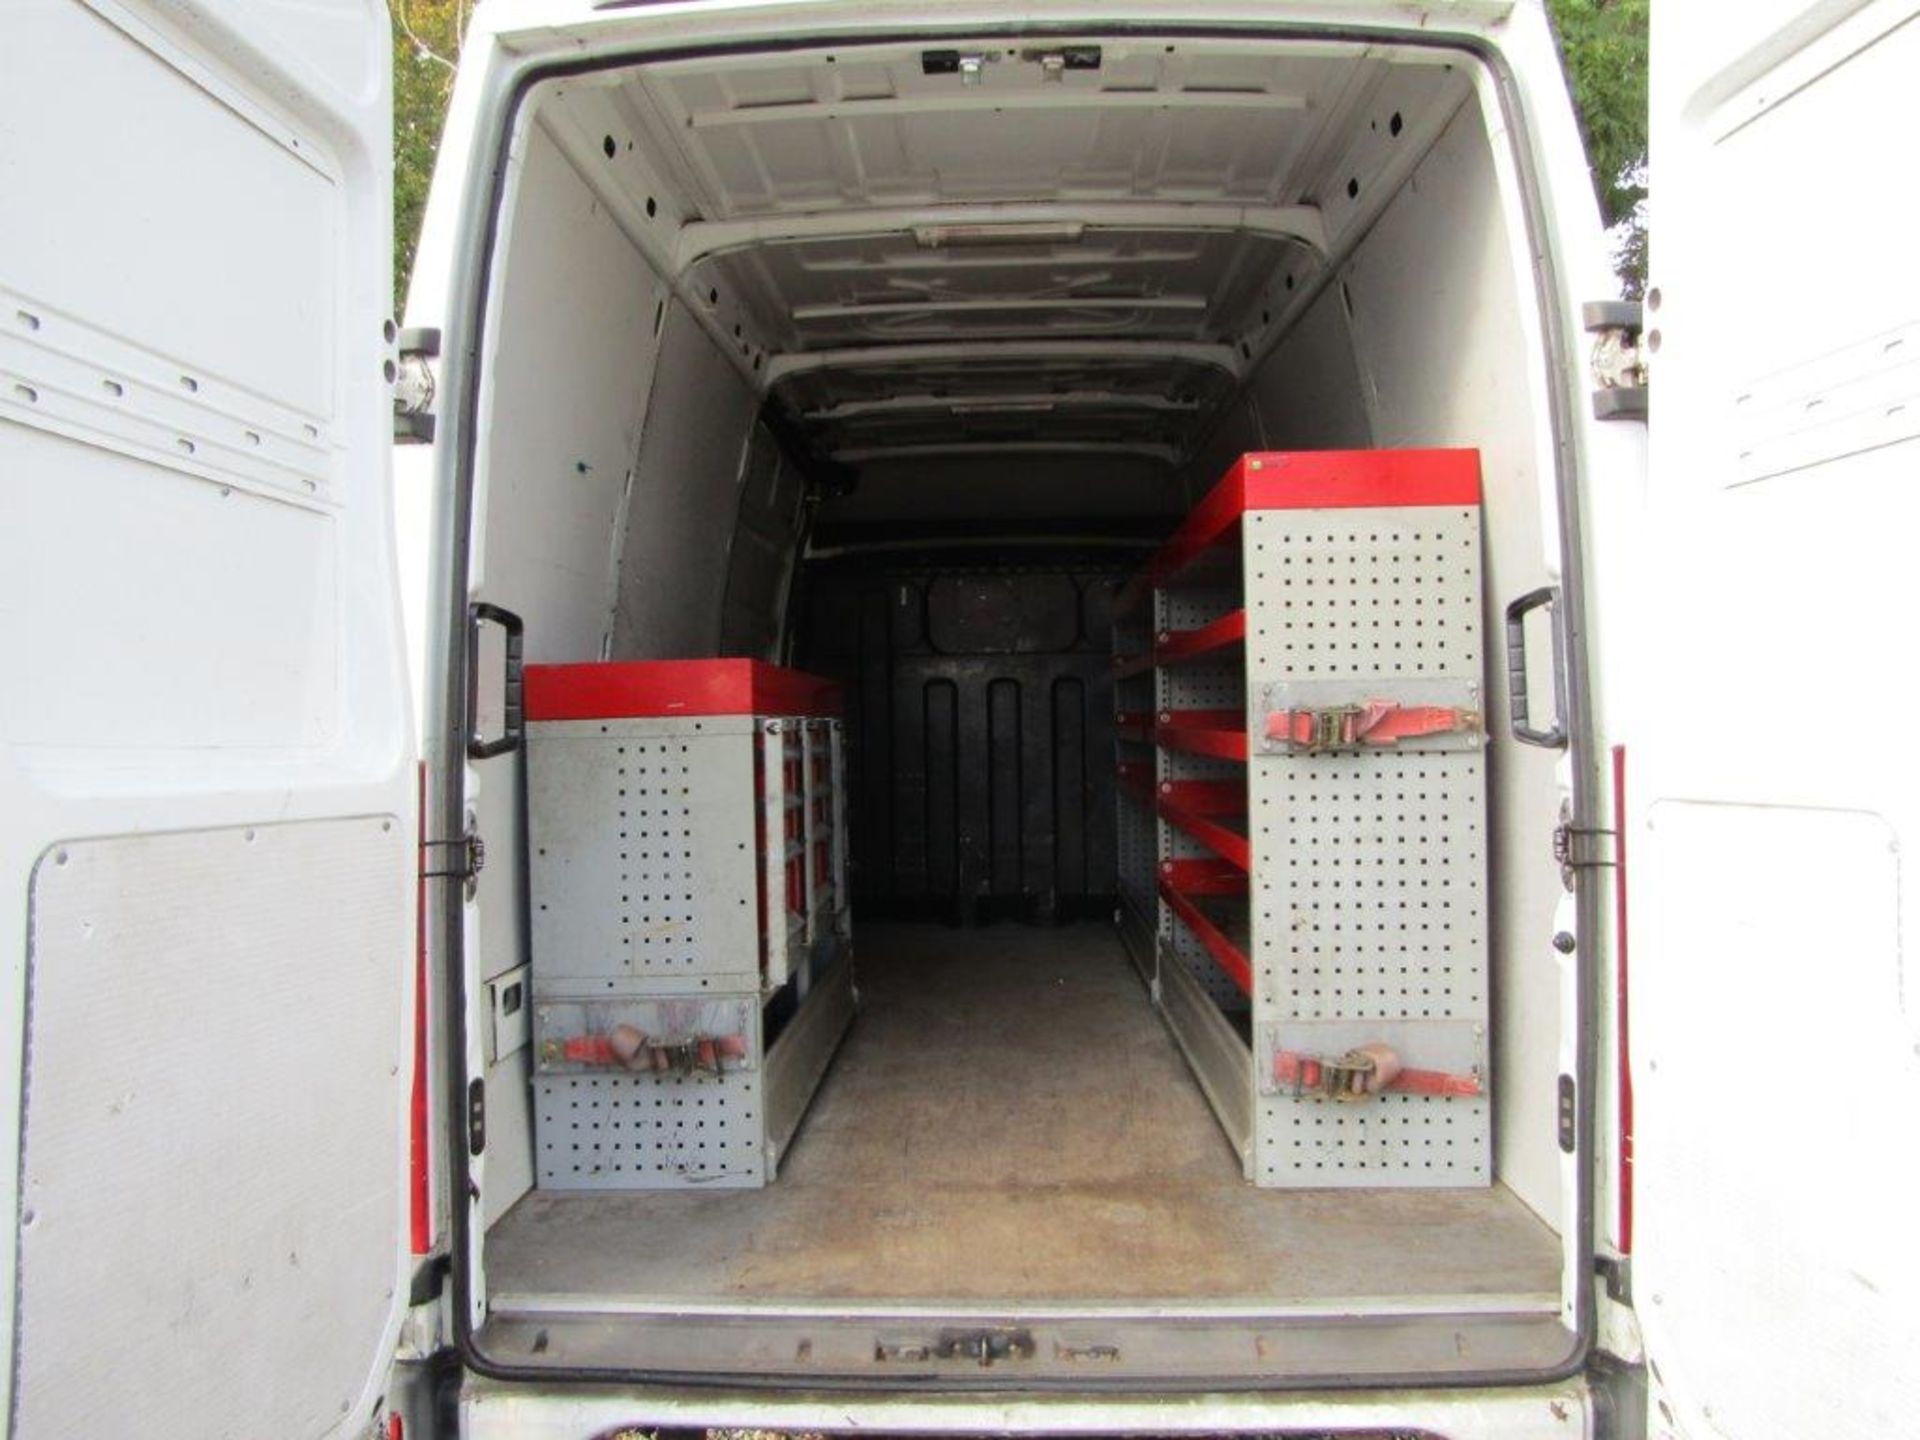 08 08 iveco Daily 35S14 MWB - Image 8 of 17